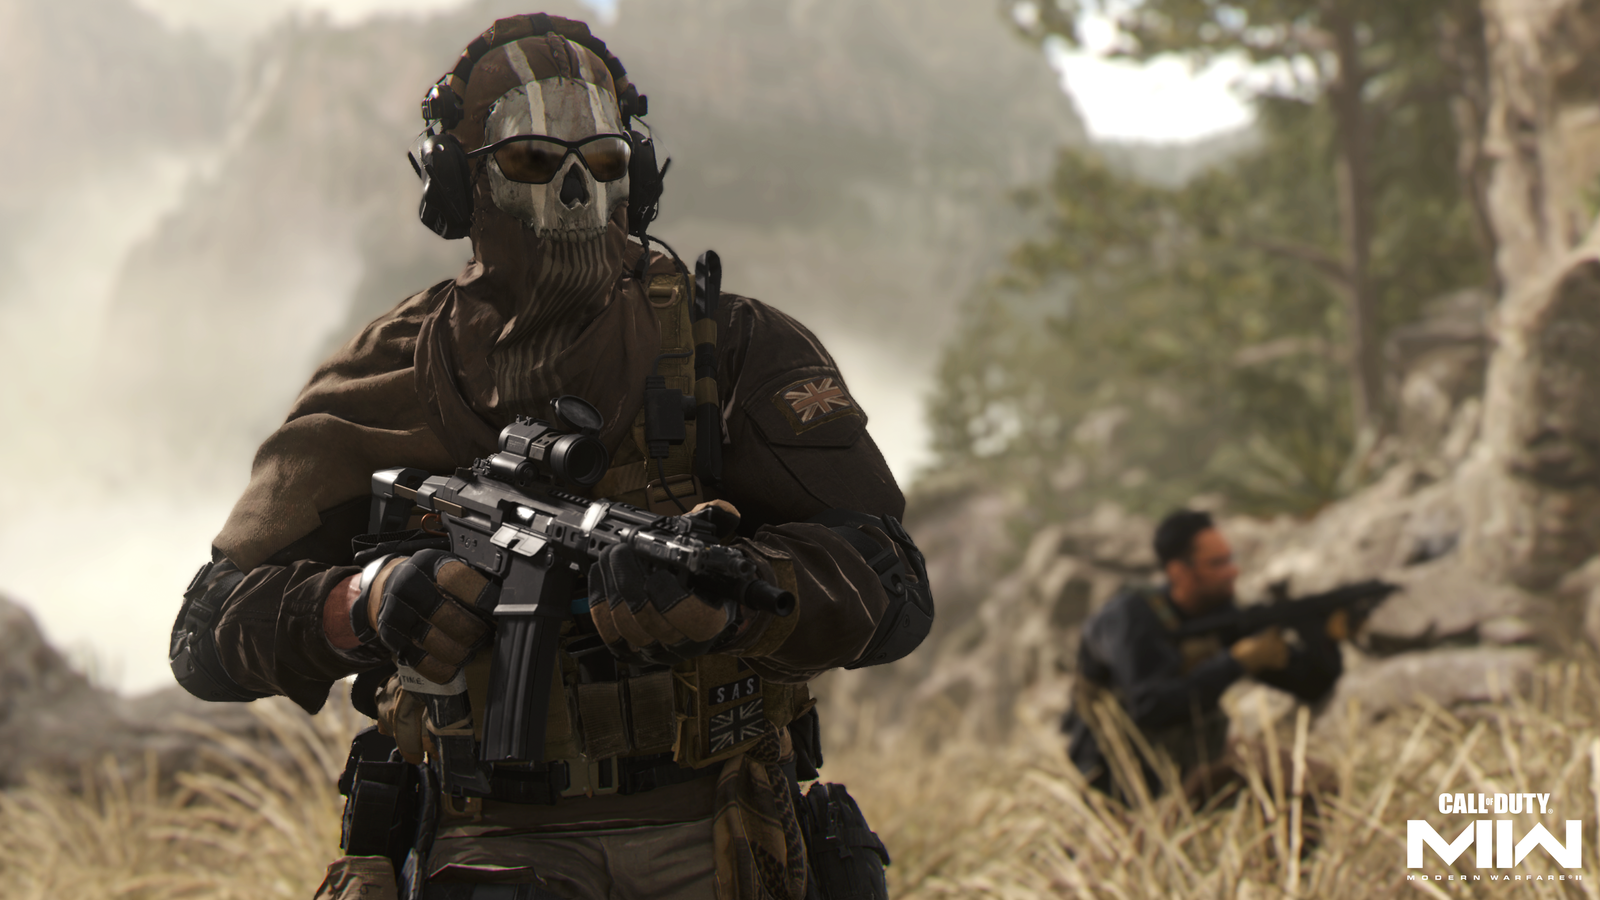 Call of Duty looks like it's coming back to Steam with Modern